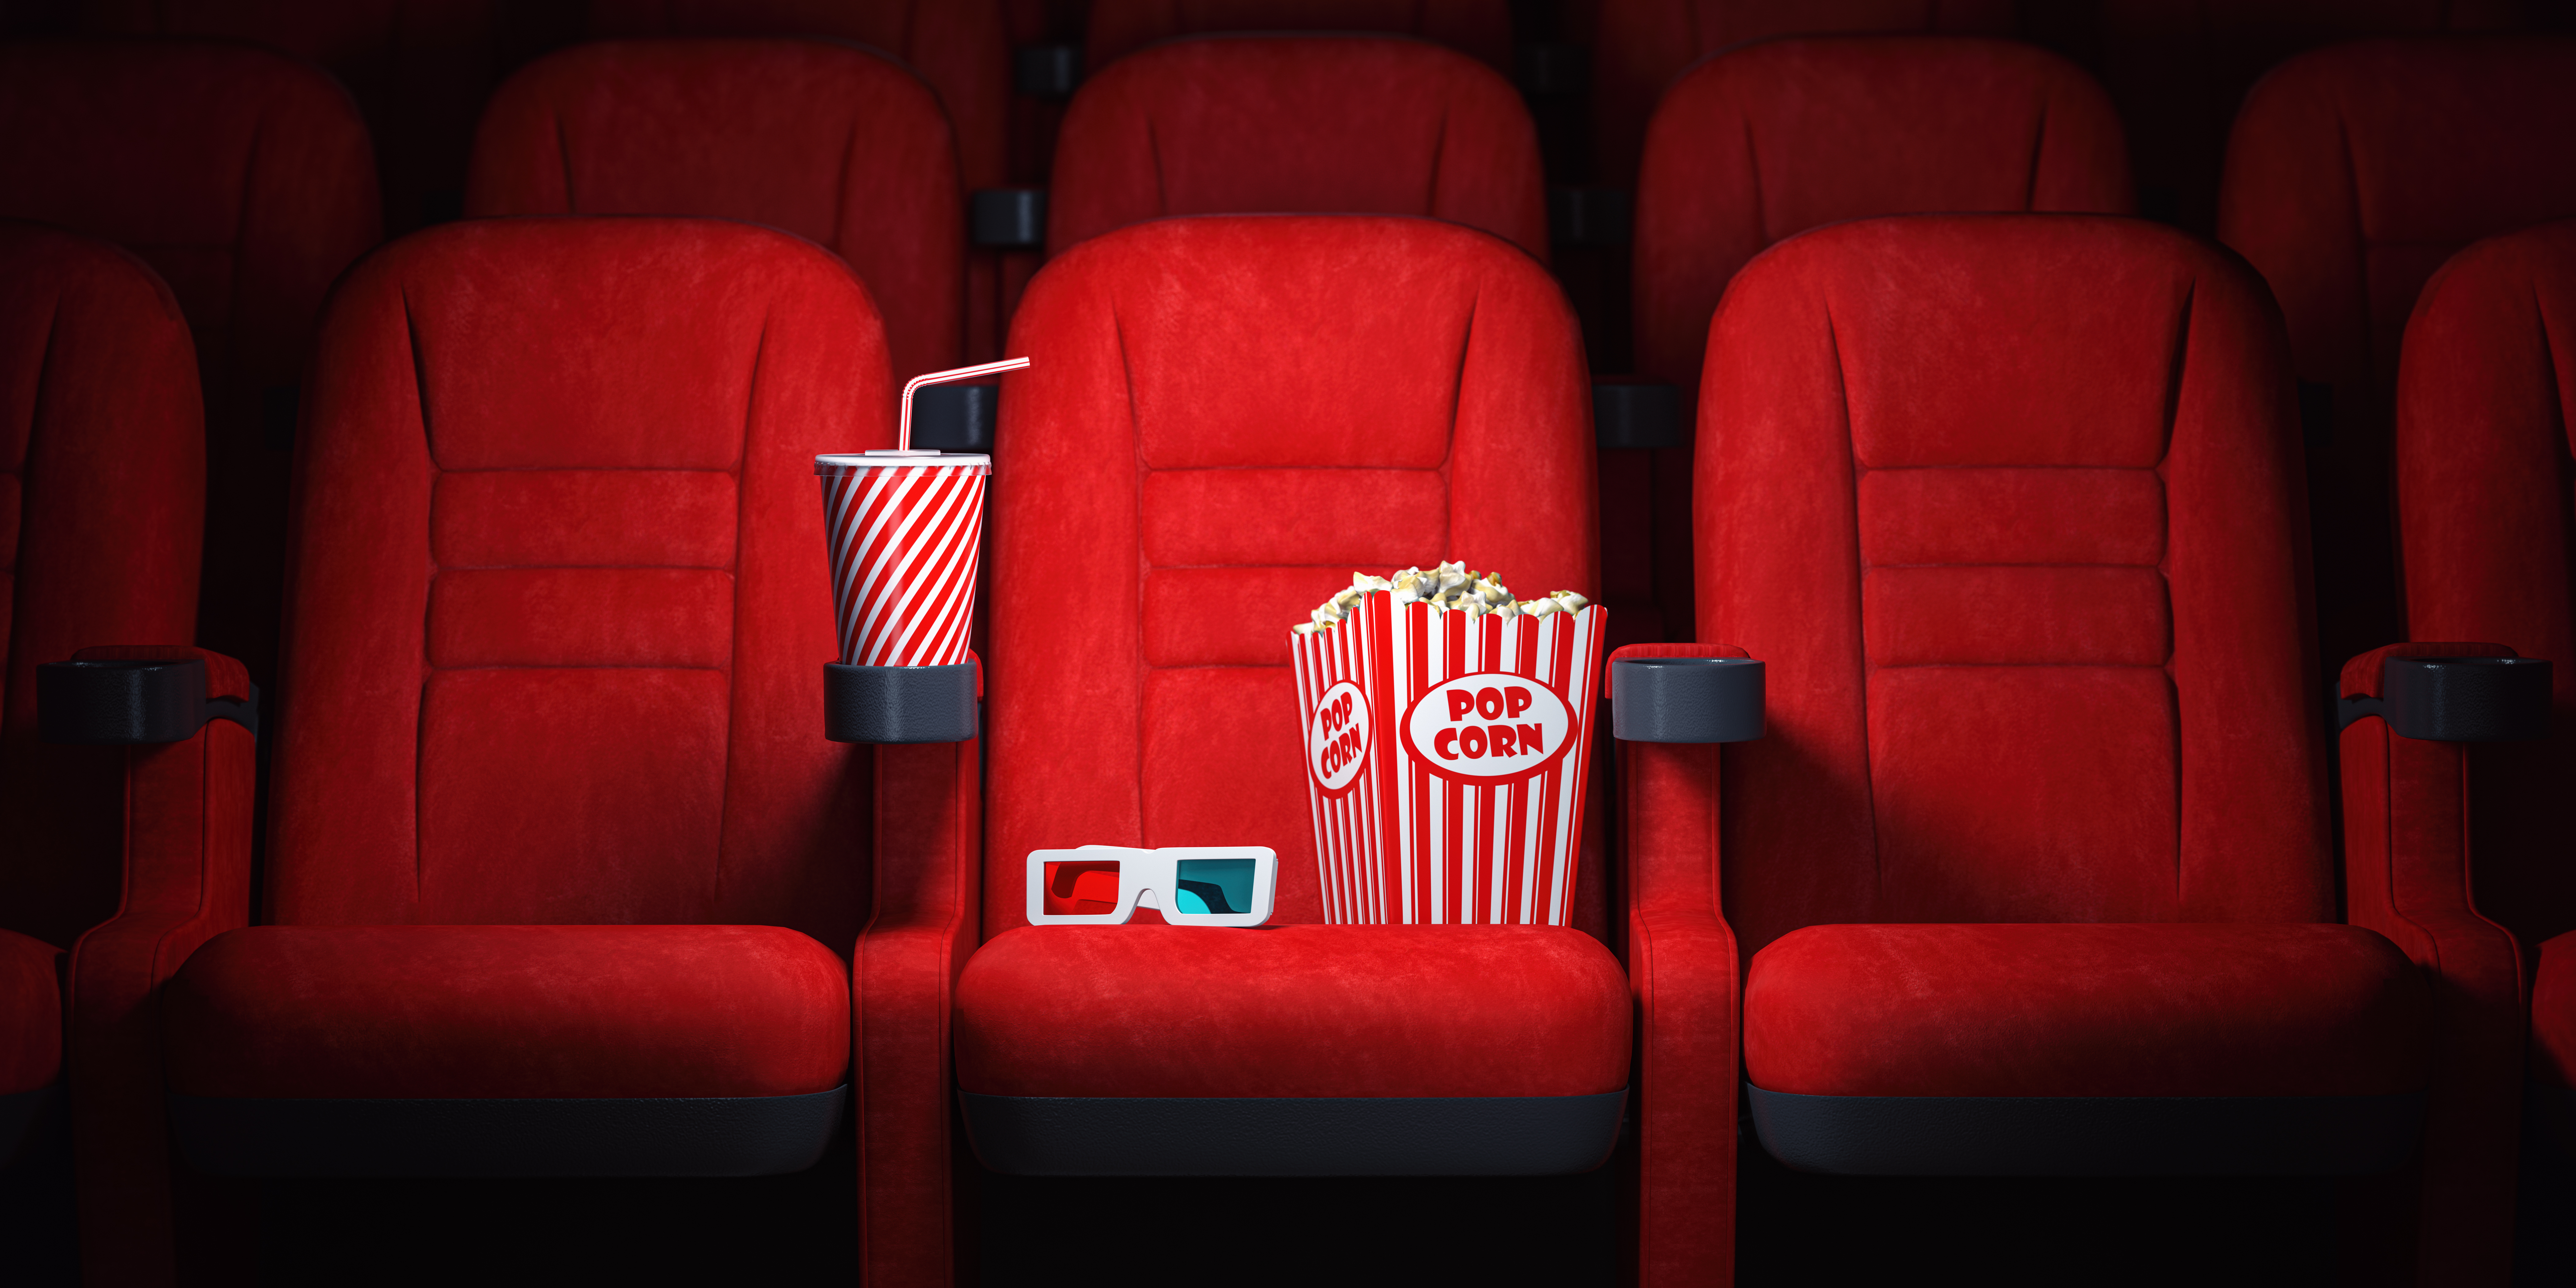 Red cinema seats and cola, popcorn and glasses in empty theater. Cinema movie theater concept background.